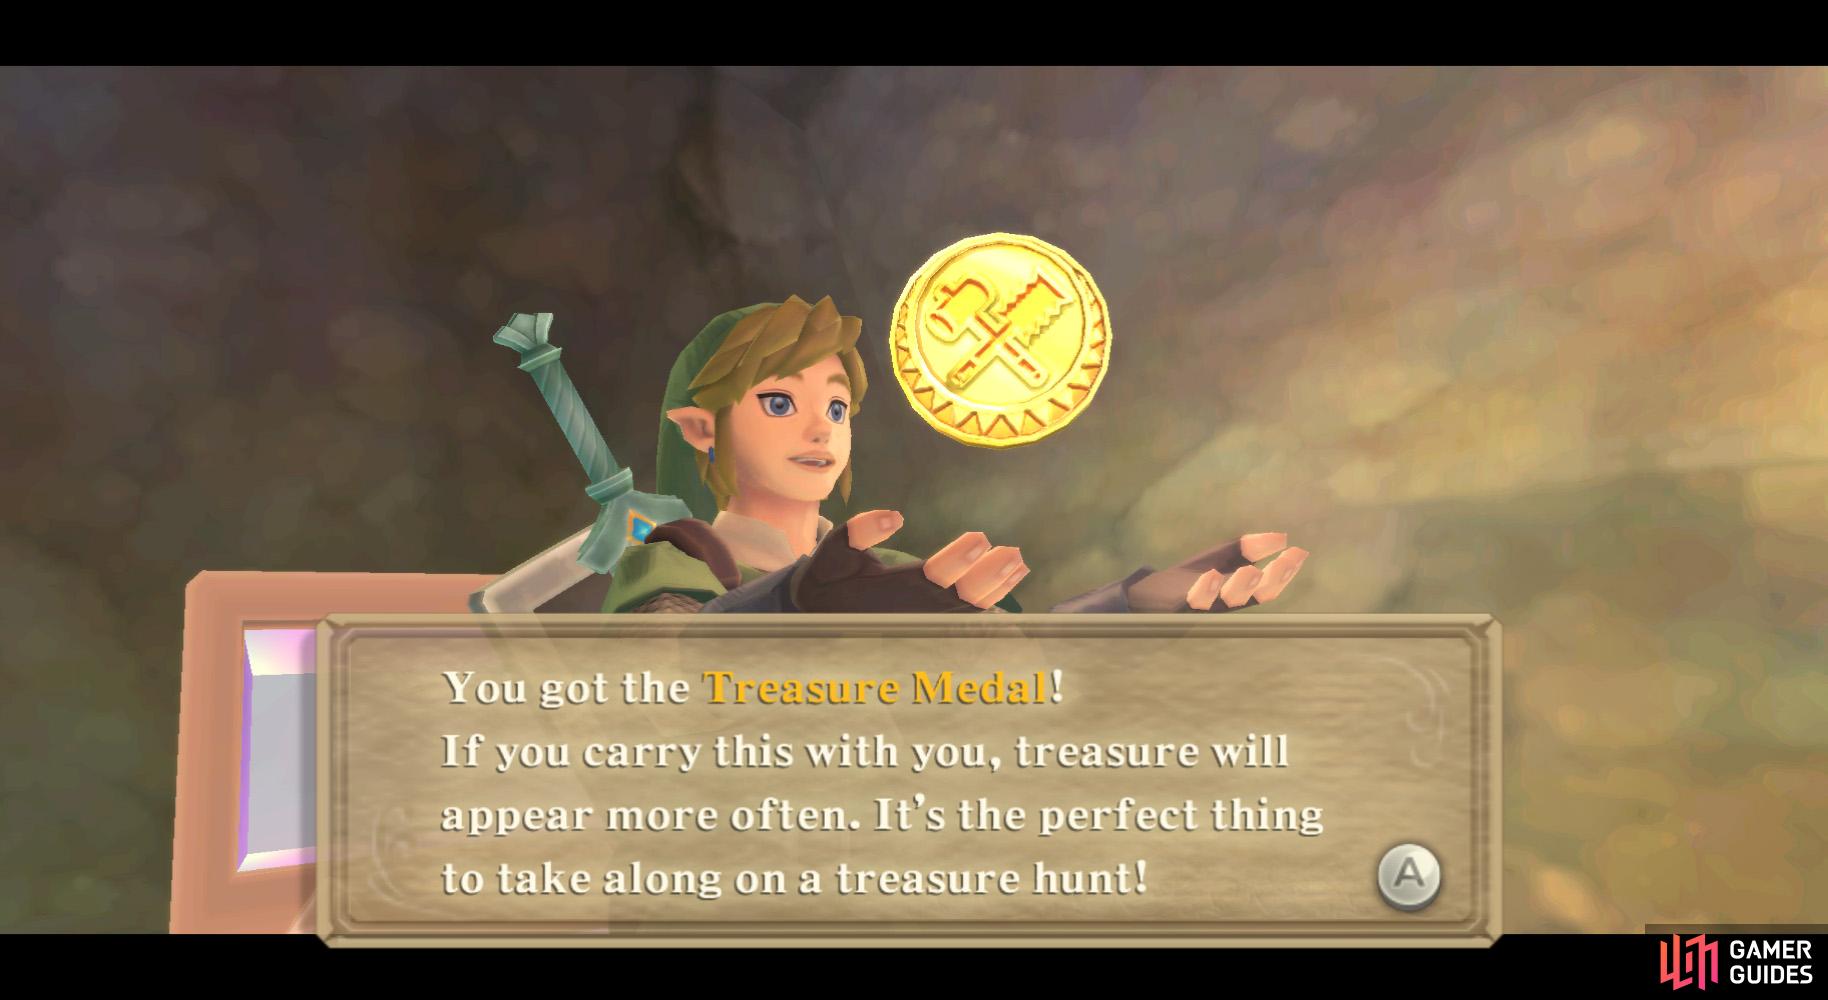 Here's the only and only Treasure Medal!